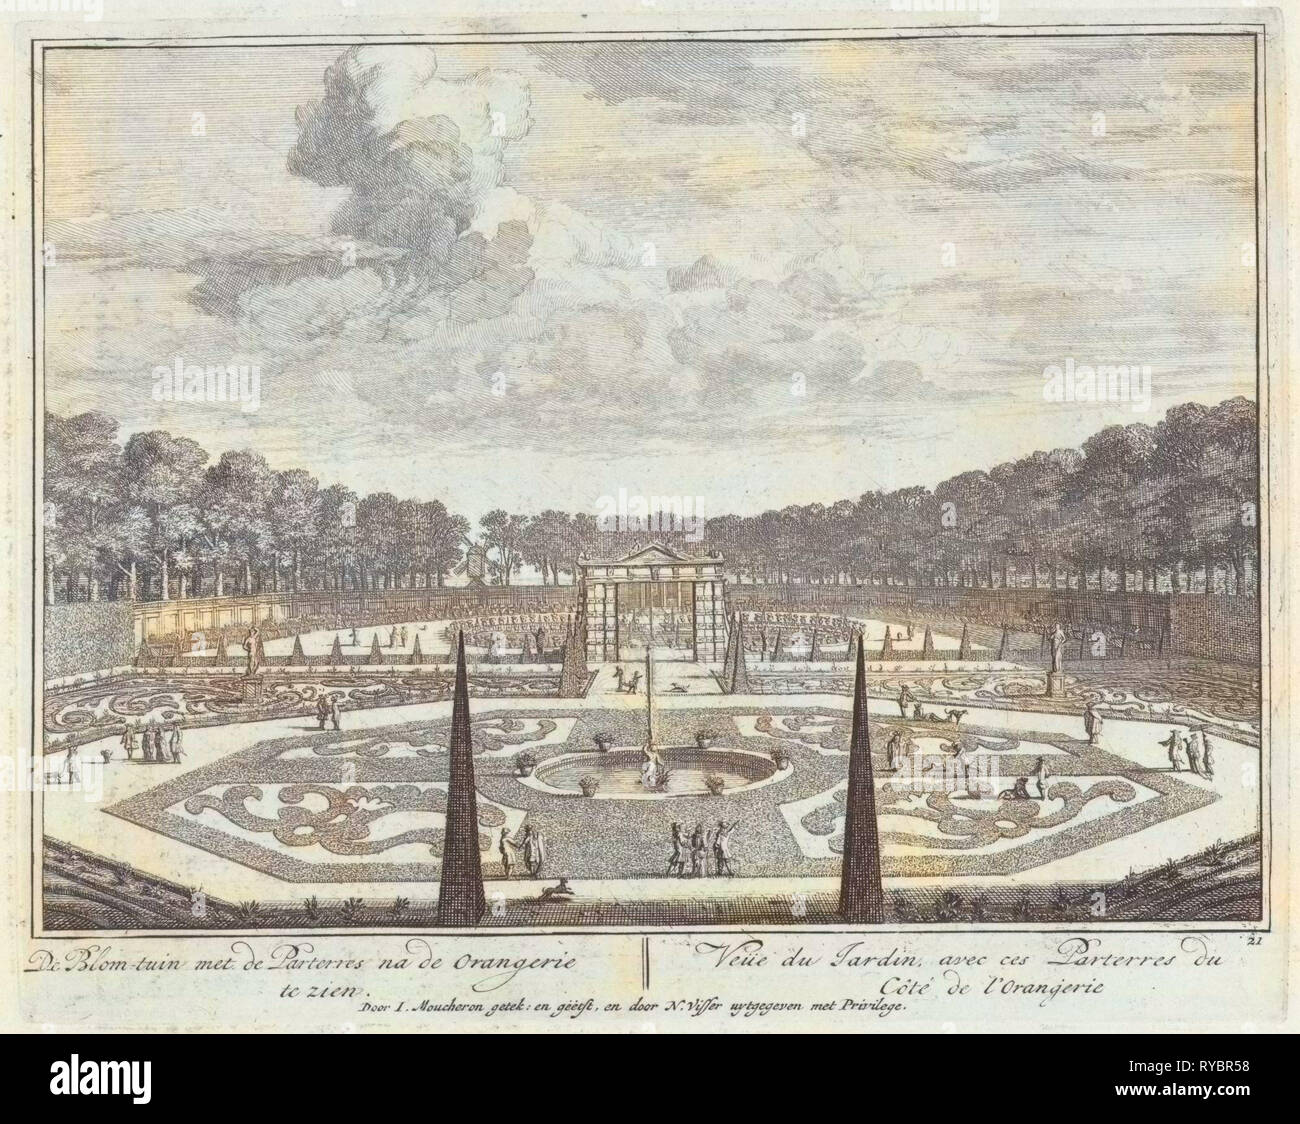 Formal gardens at Castle Heemstede, Large pond at Castle Heemstede, Cave seen from the gallery, Grotto in the garden of Castle Heemstede, Isaac de Moucheron, 1706 - 1719 Stock Photo